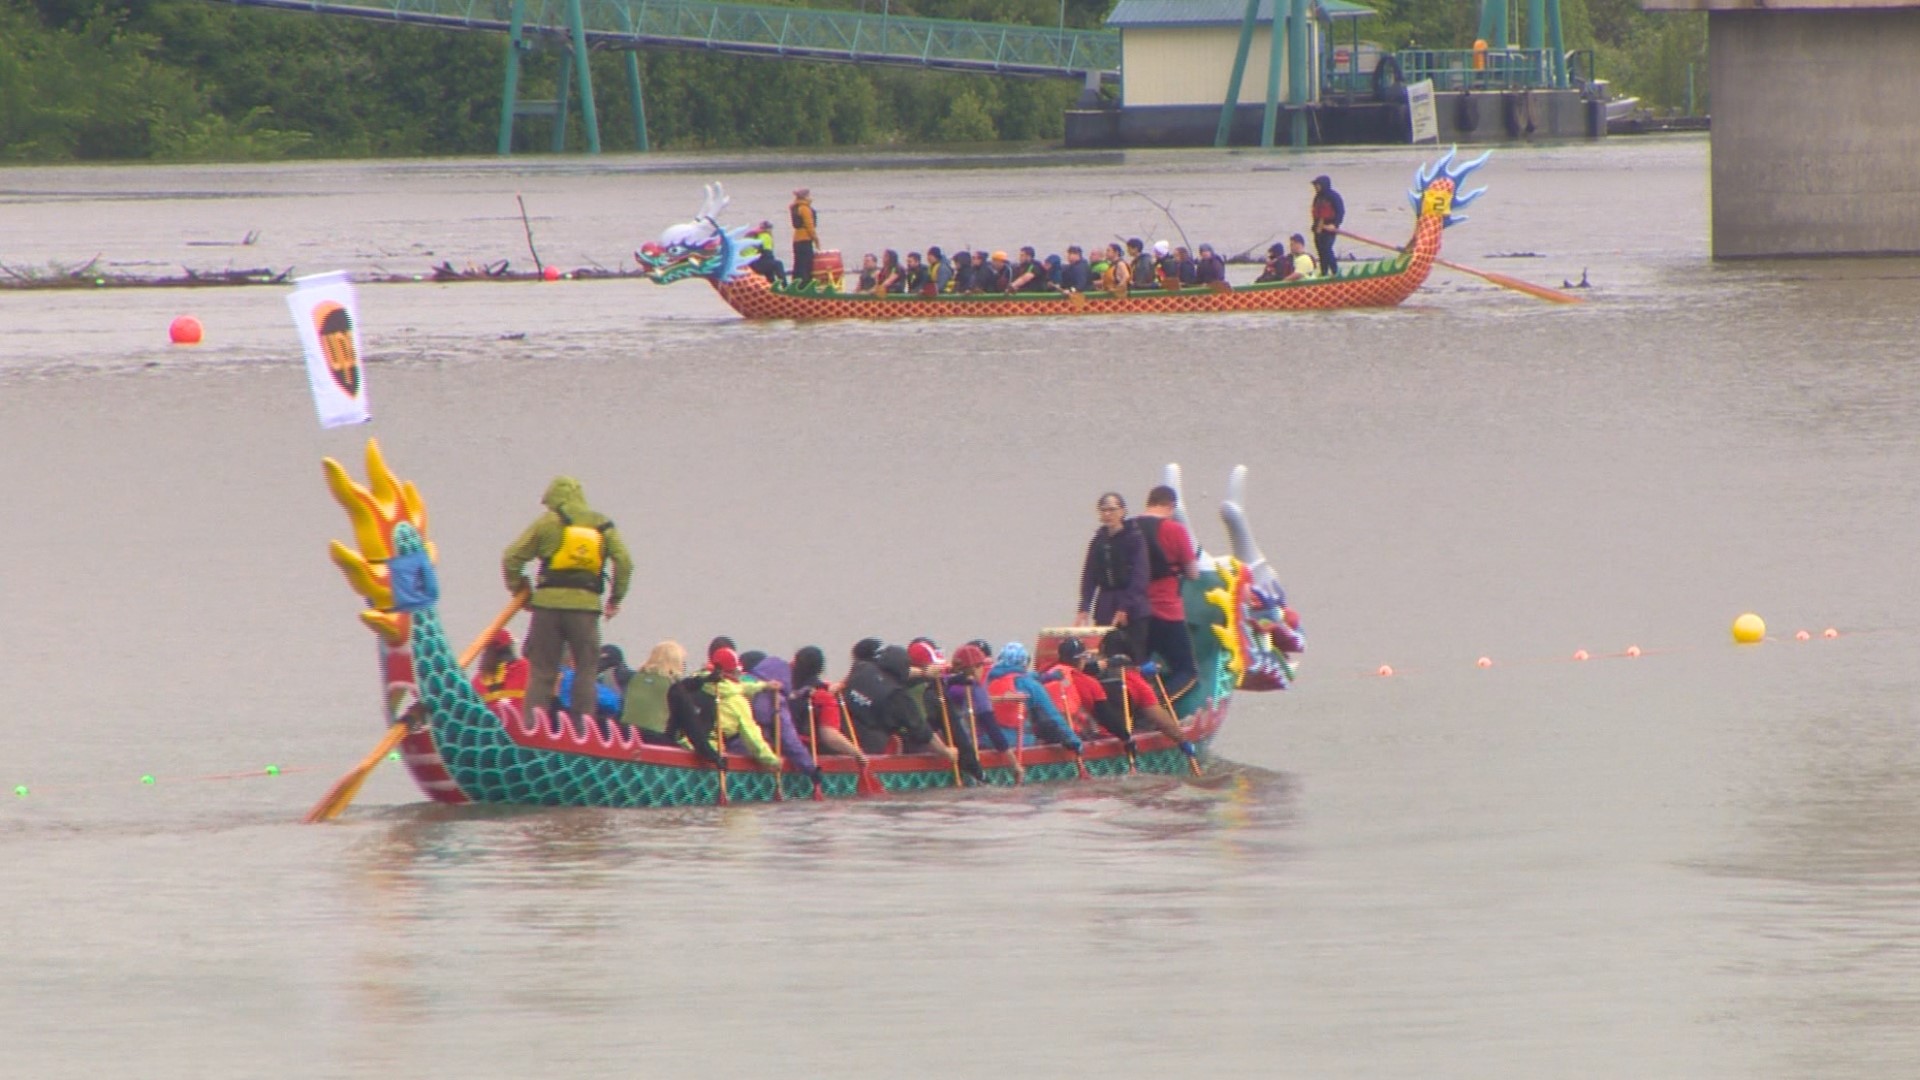 Dragon boat races on the Willamette River will take place June 10-11. KGW Sunrise anchor and reporter Drew Carney got a preview.